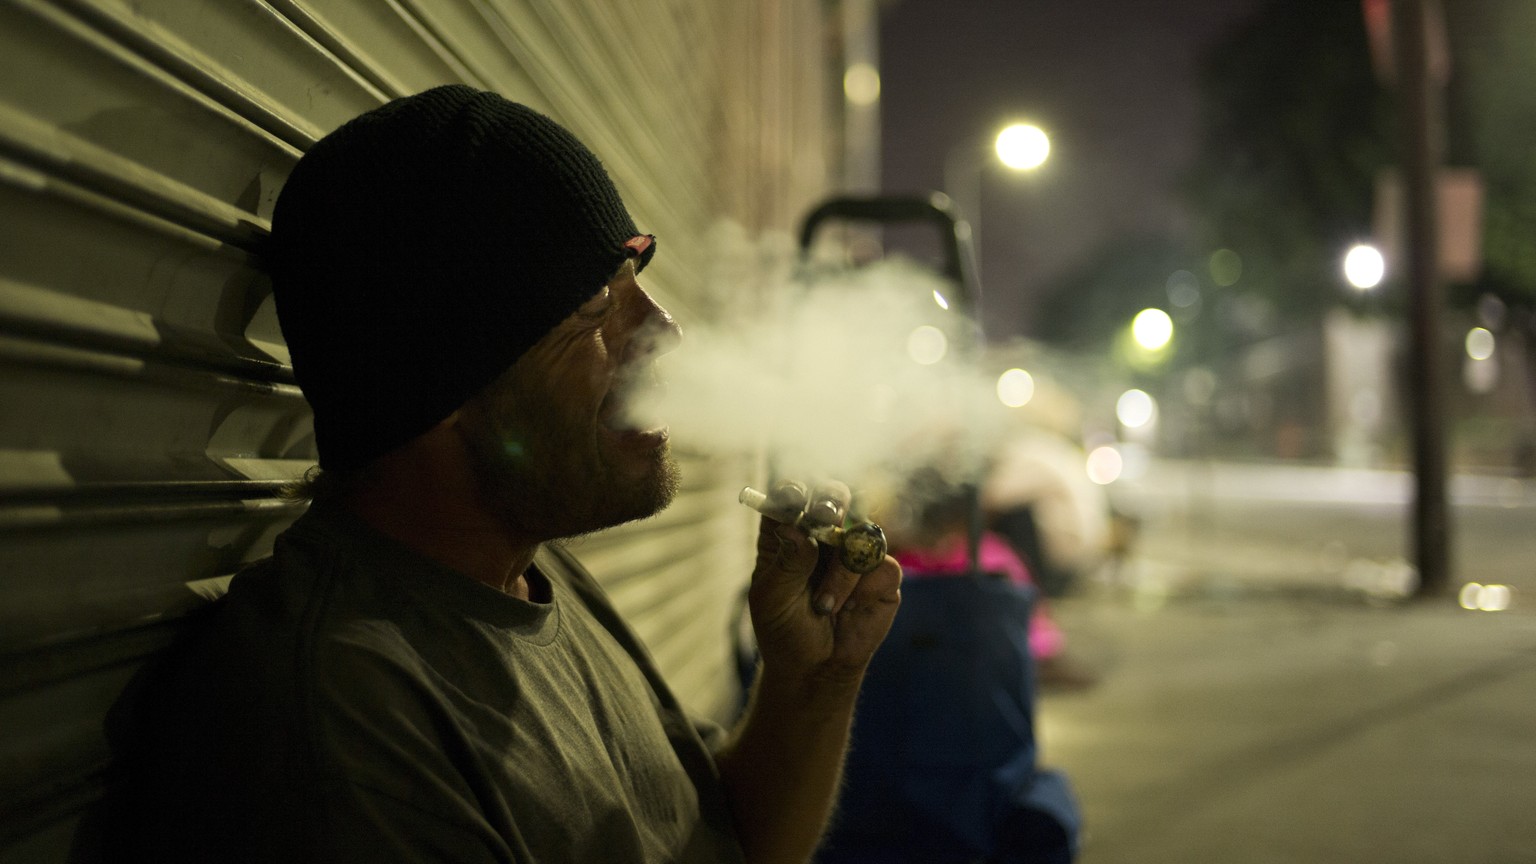 D. J. Meek, a 40-year-old homeless drug addict, smokes crystal meth Friday, Sept. 8, 2017, in the Skid Row area of downtown Los Angeles. Meeks&#039; veins are collapsed due to chronic use of heroin. H ...